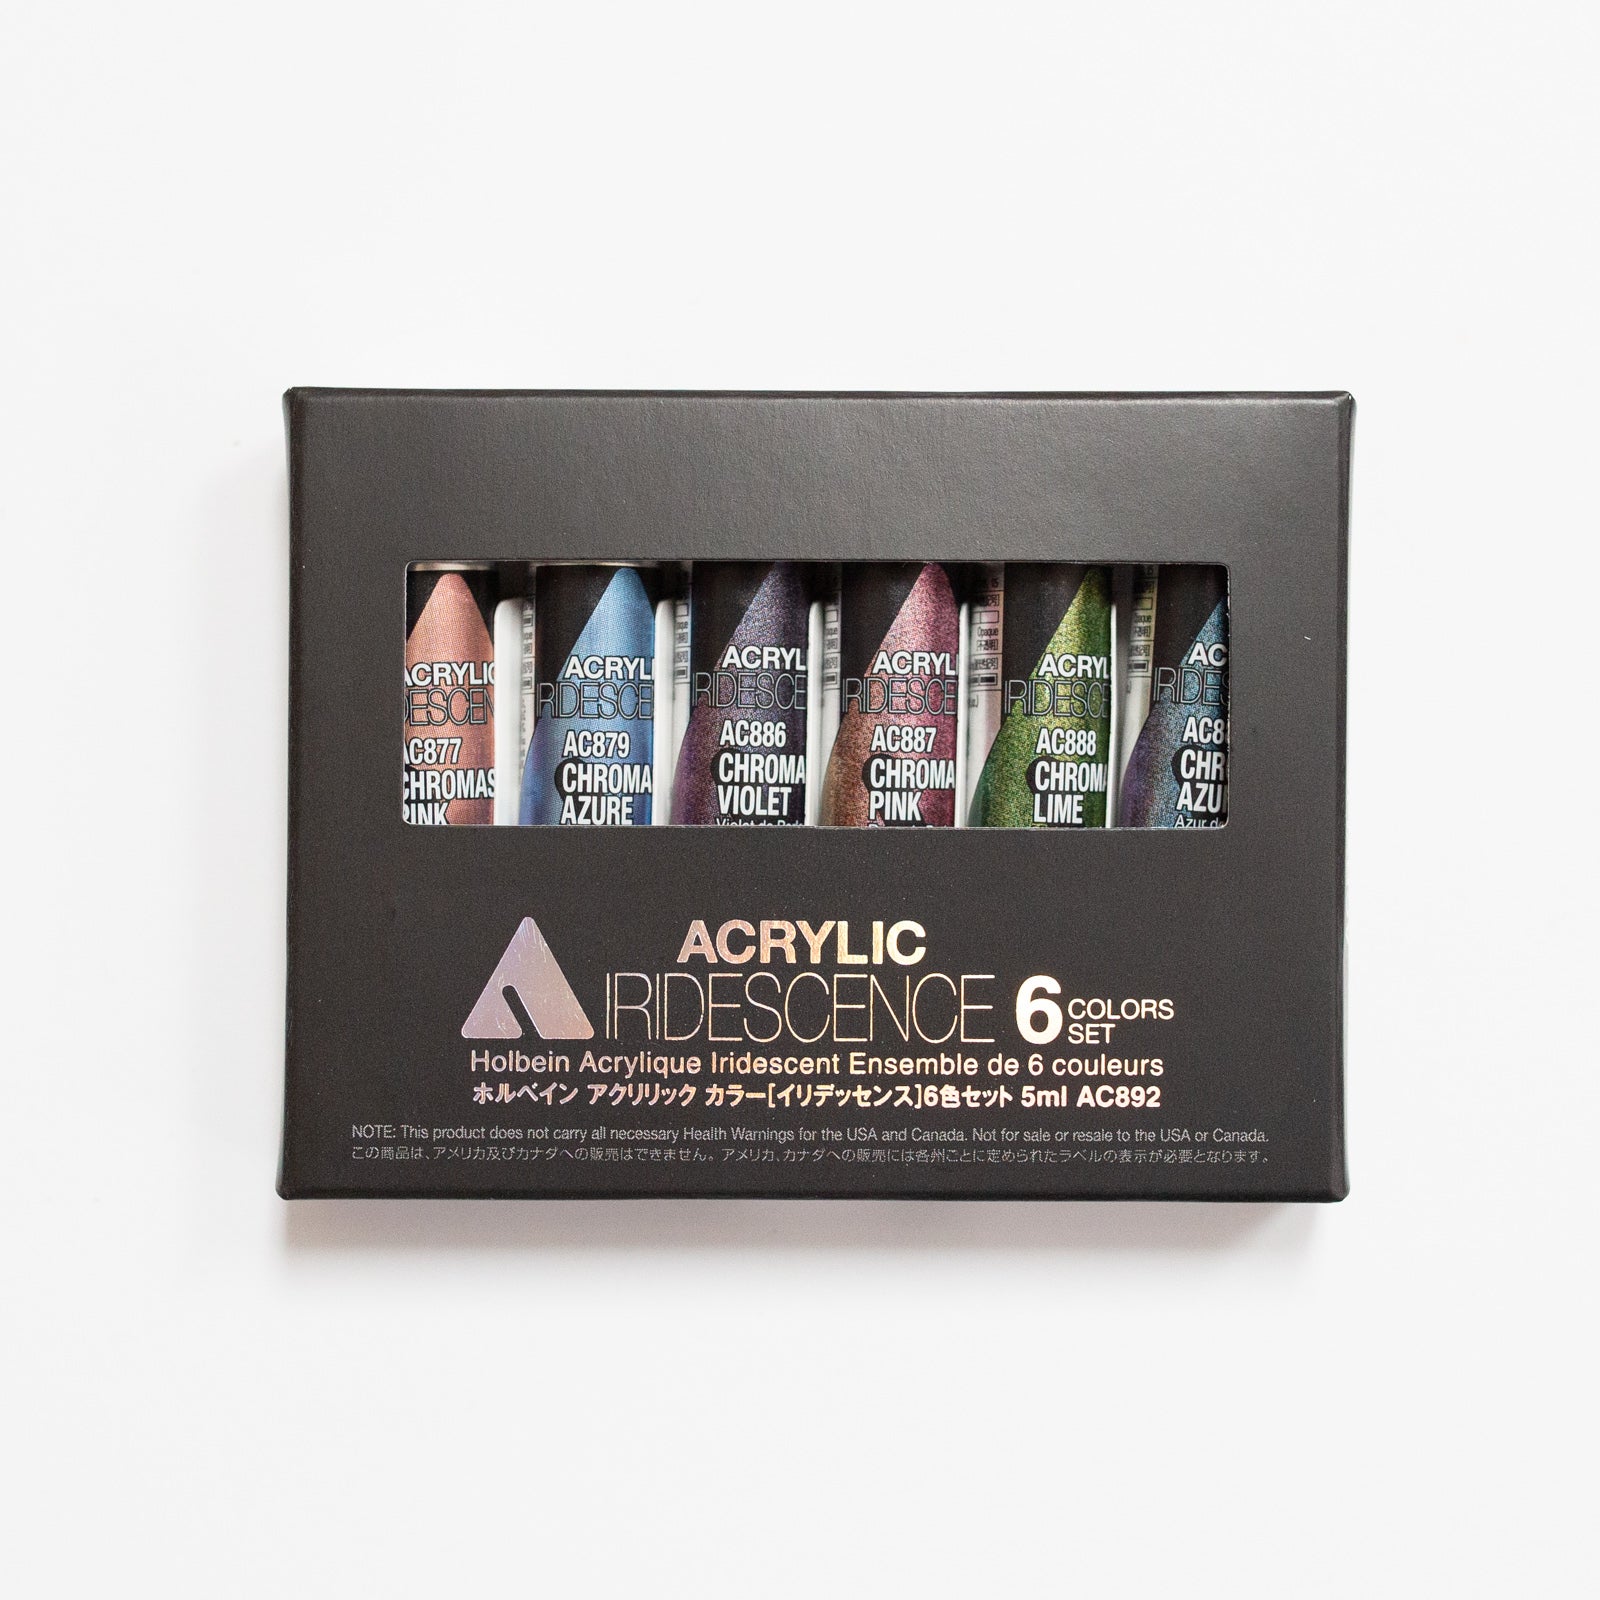 Holbein Iridescence 6 colors set